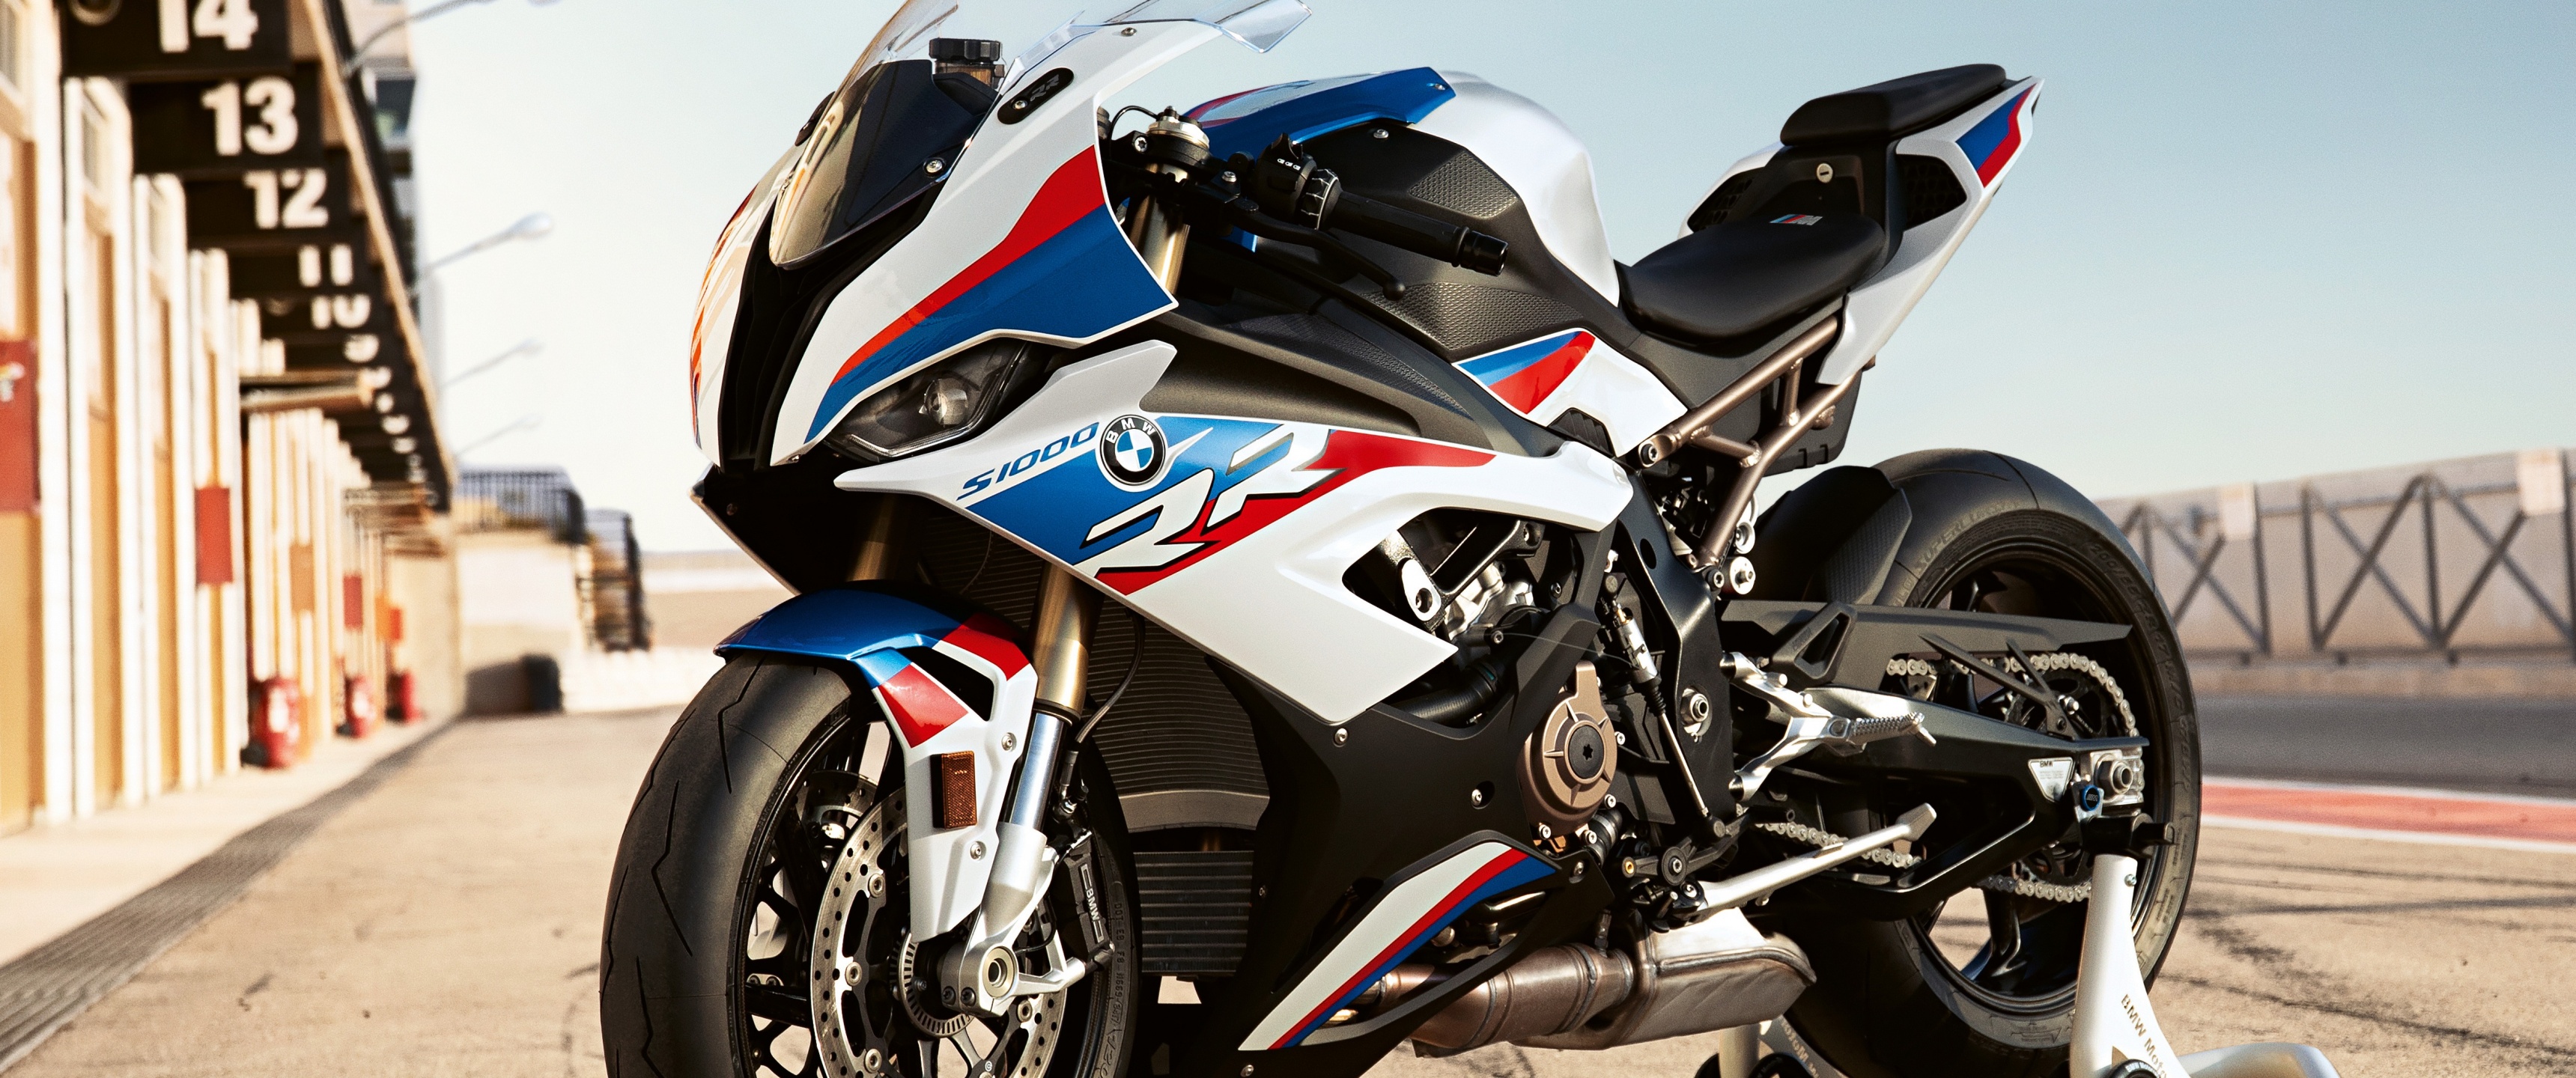 24189 BMW S1000RR 4K Motorcycle BMW S1000RR  Rare Gallery HD Wallpapers